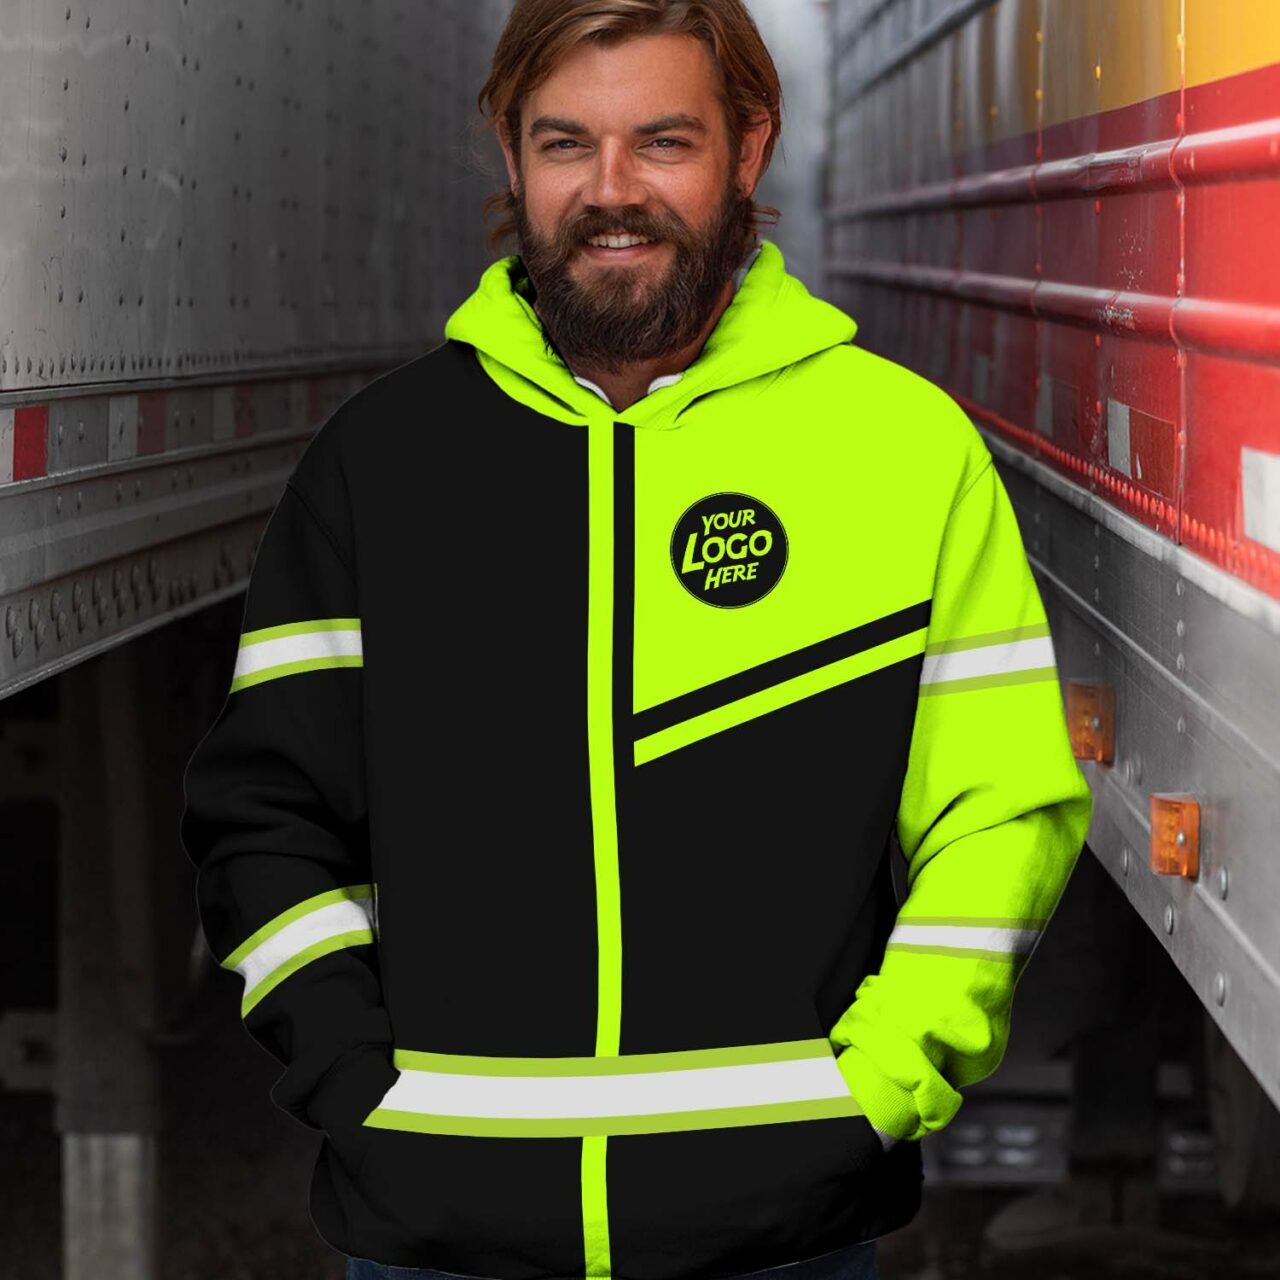 Yellow vests like road workers have? Check out who is wearing a neon uniform